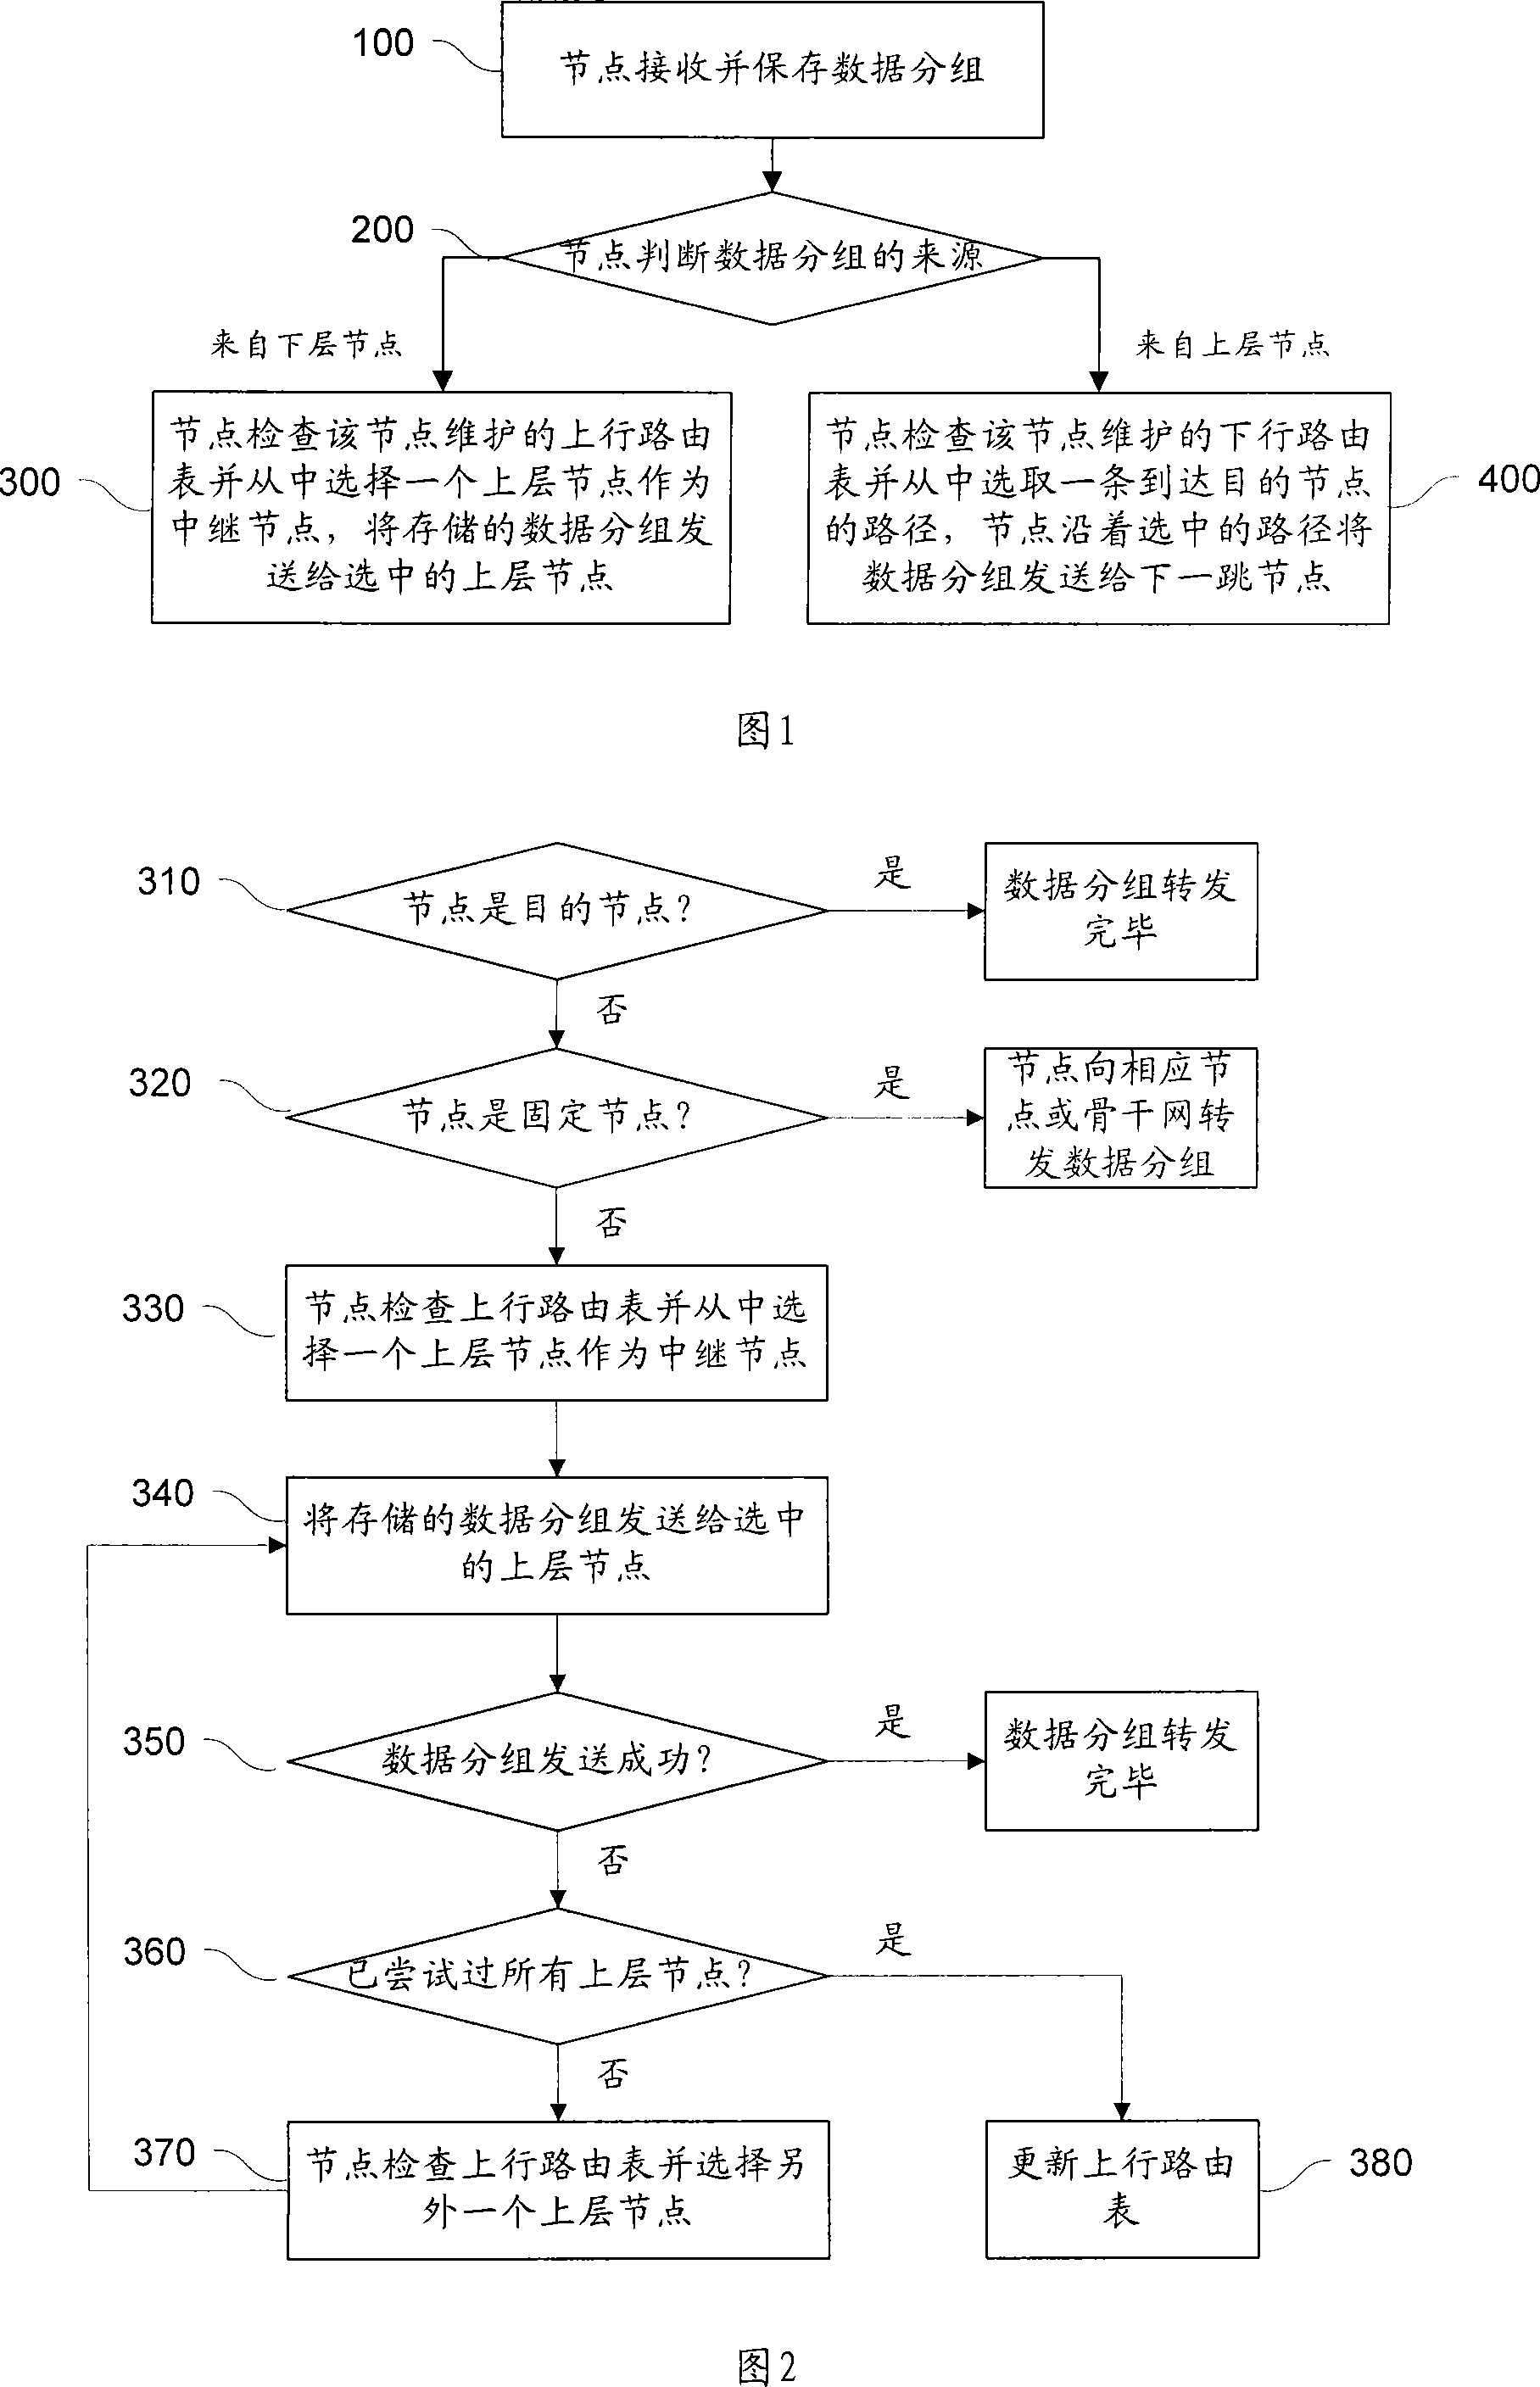 Tree structure based routing method